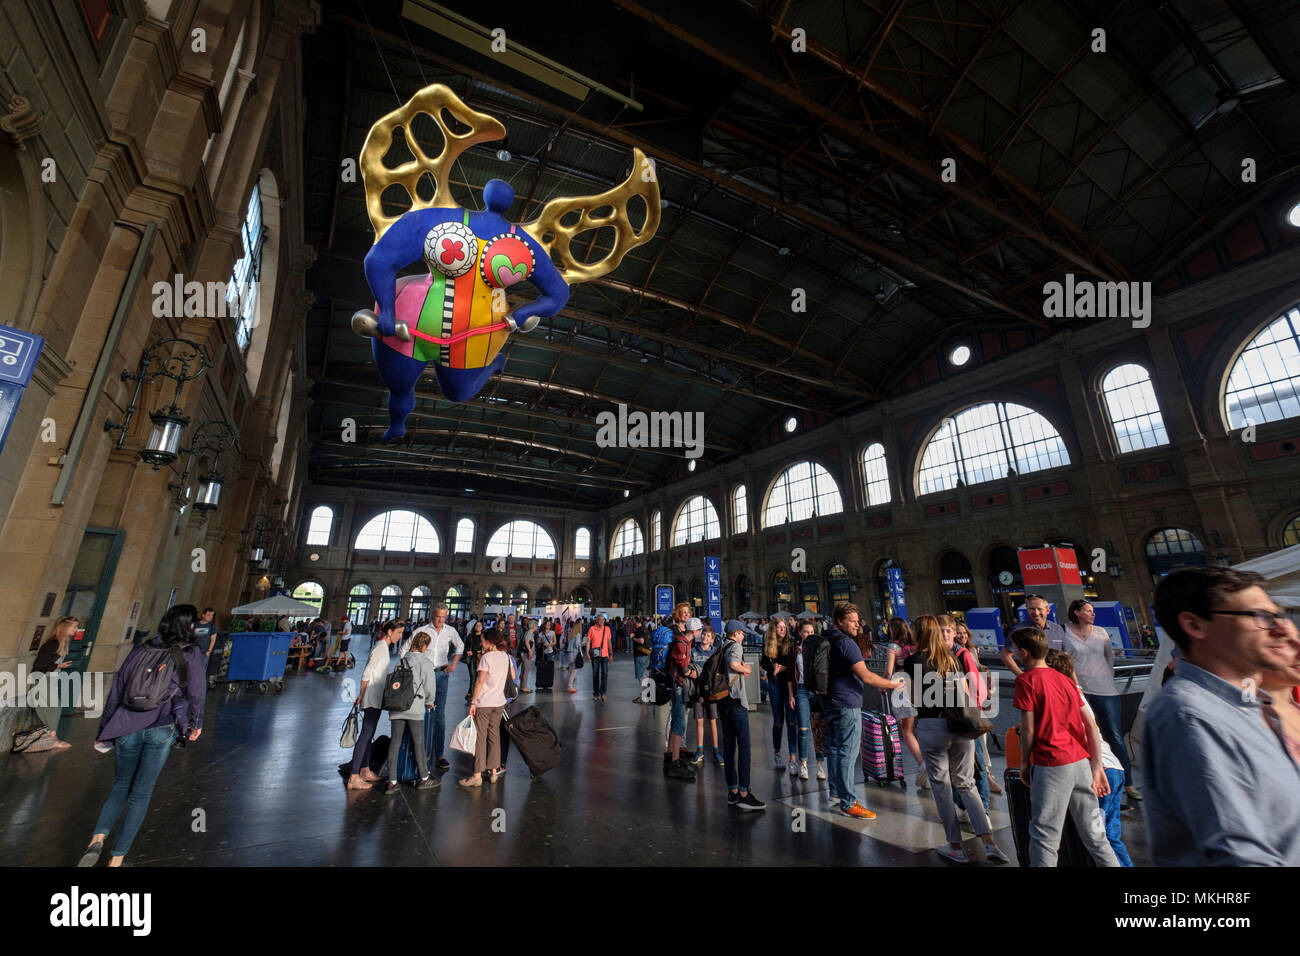 Page 2 - Zurich Hauptbahnhof High Resolution Stock Photography and Images -  Alamy